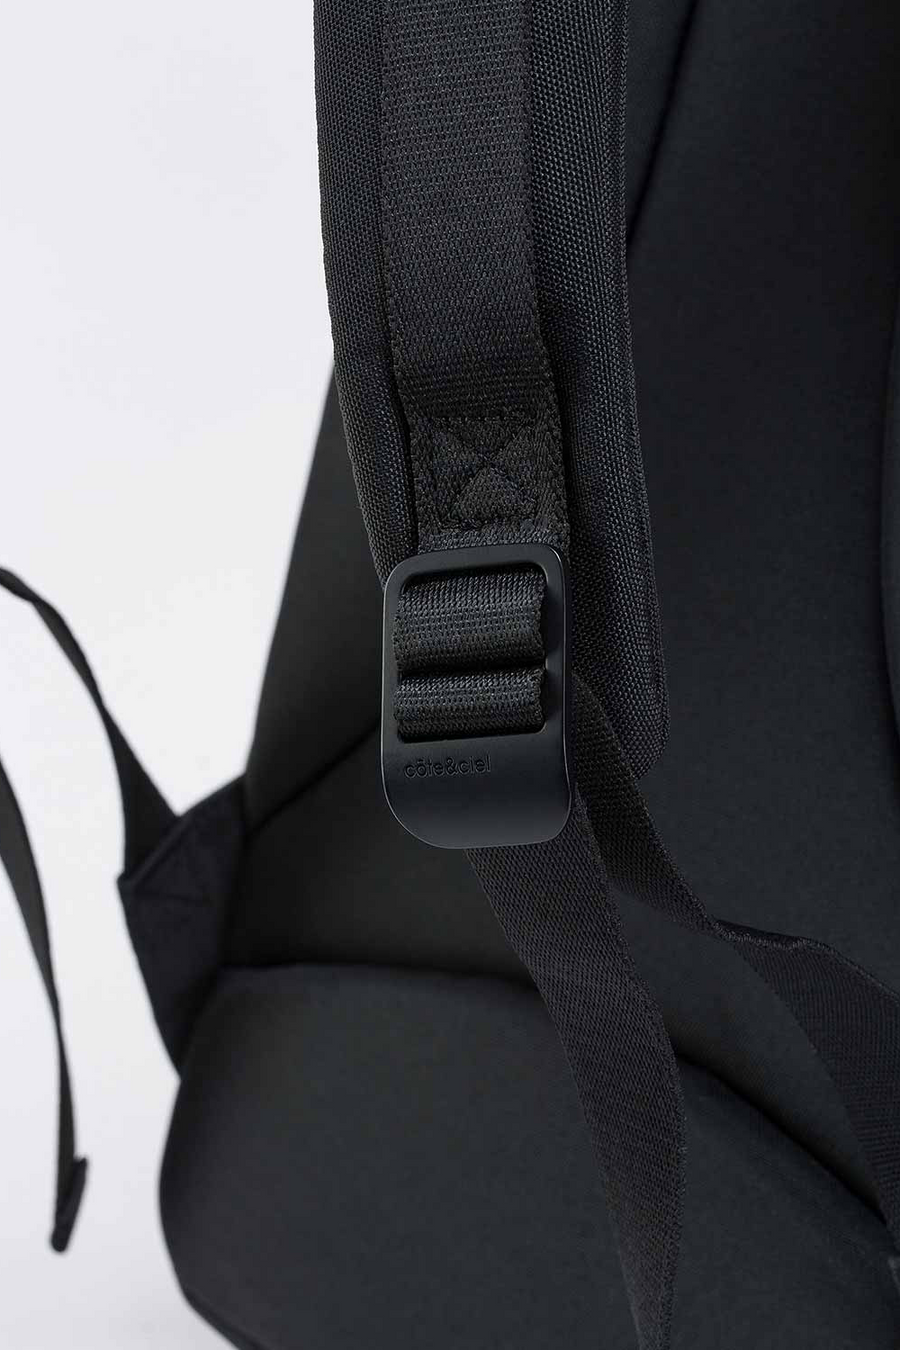 Buy the Cote & Ciel Sormonne EcoYarn Backpack in Black at Intro. Spend £50 for free UK delivery. Official stockists. We ship worldwide.